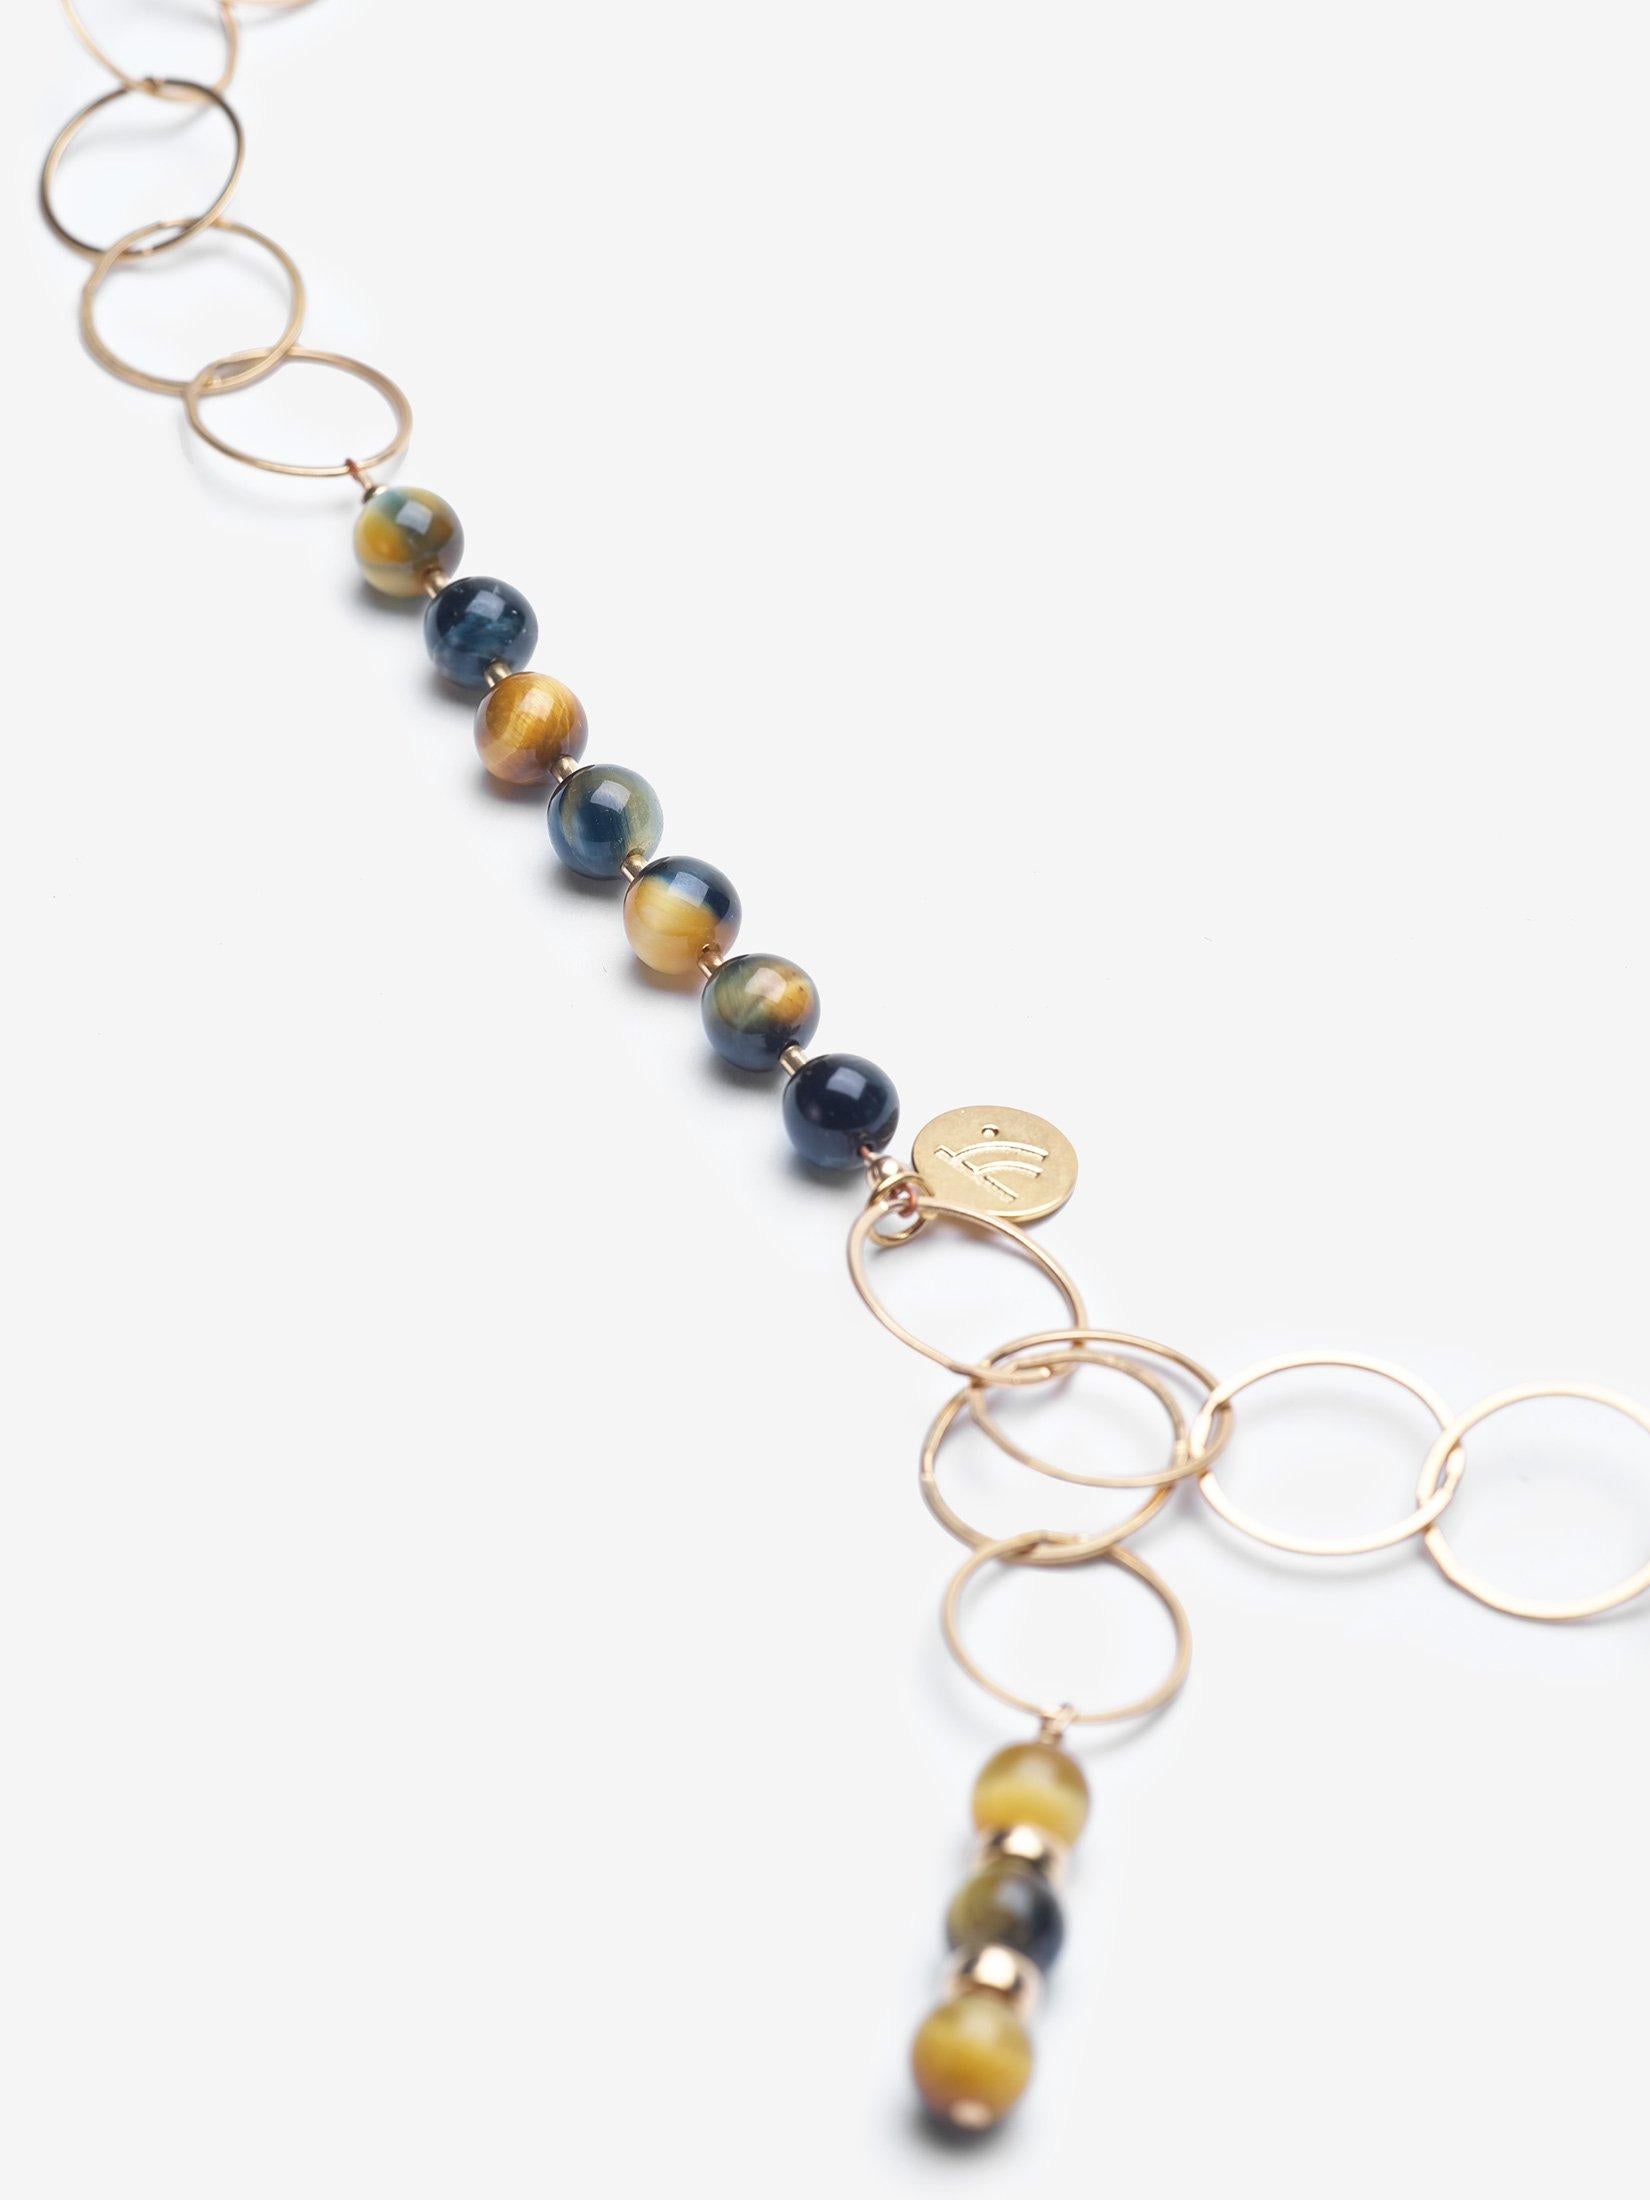 Story Behind the Jewelry
Chosen is one our initial premier necklaces and its name is very fitting as it a top seller.  The 14K gold chain is adorned with a natural leaf pendant with a patina finish and accented with yellow midnight blue tiger's